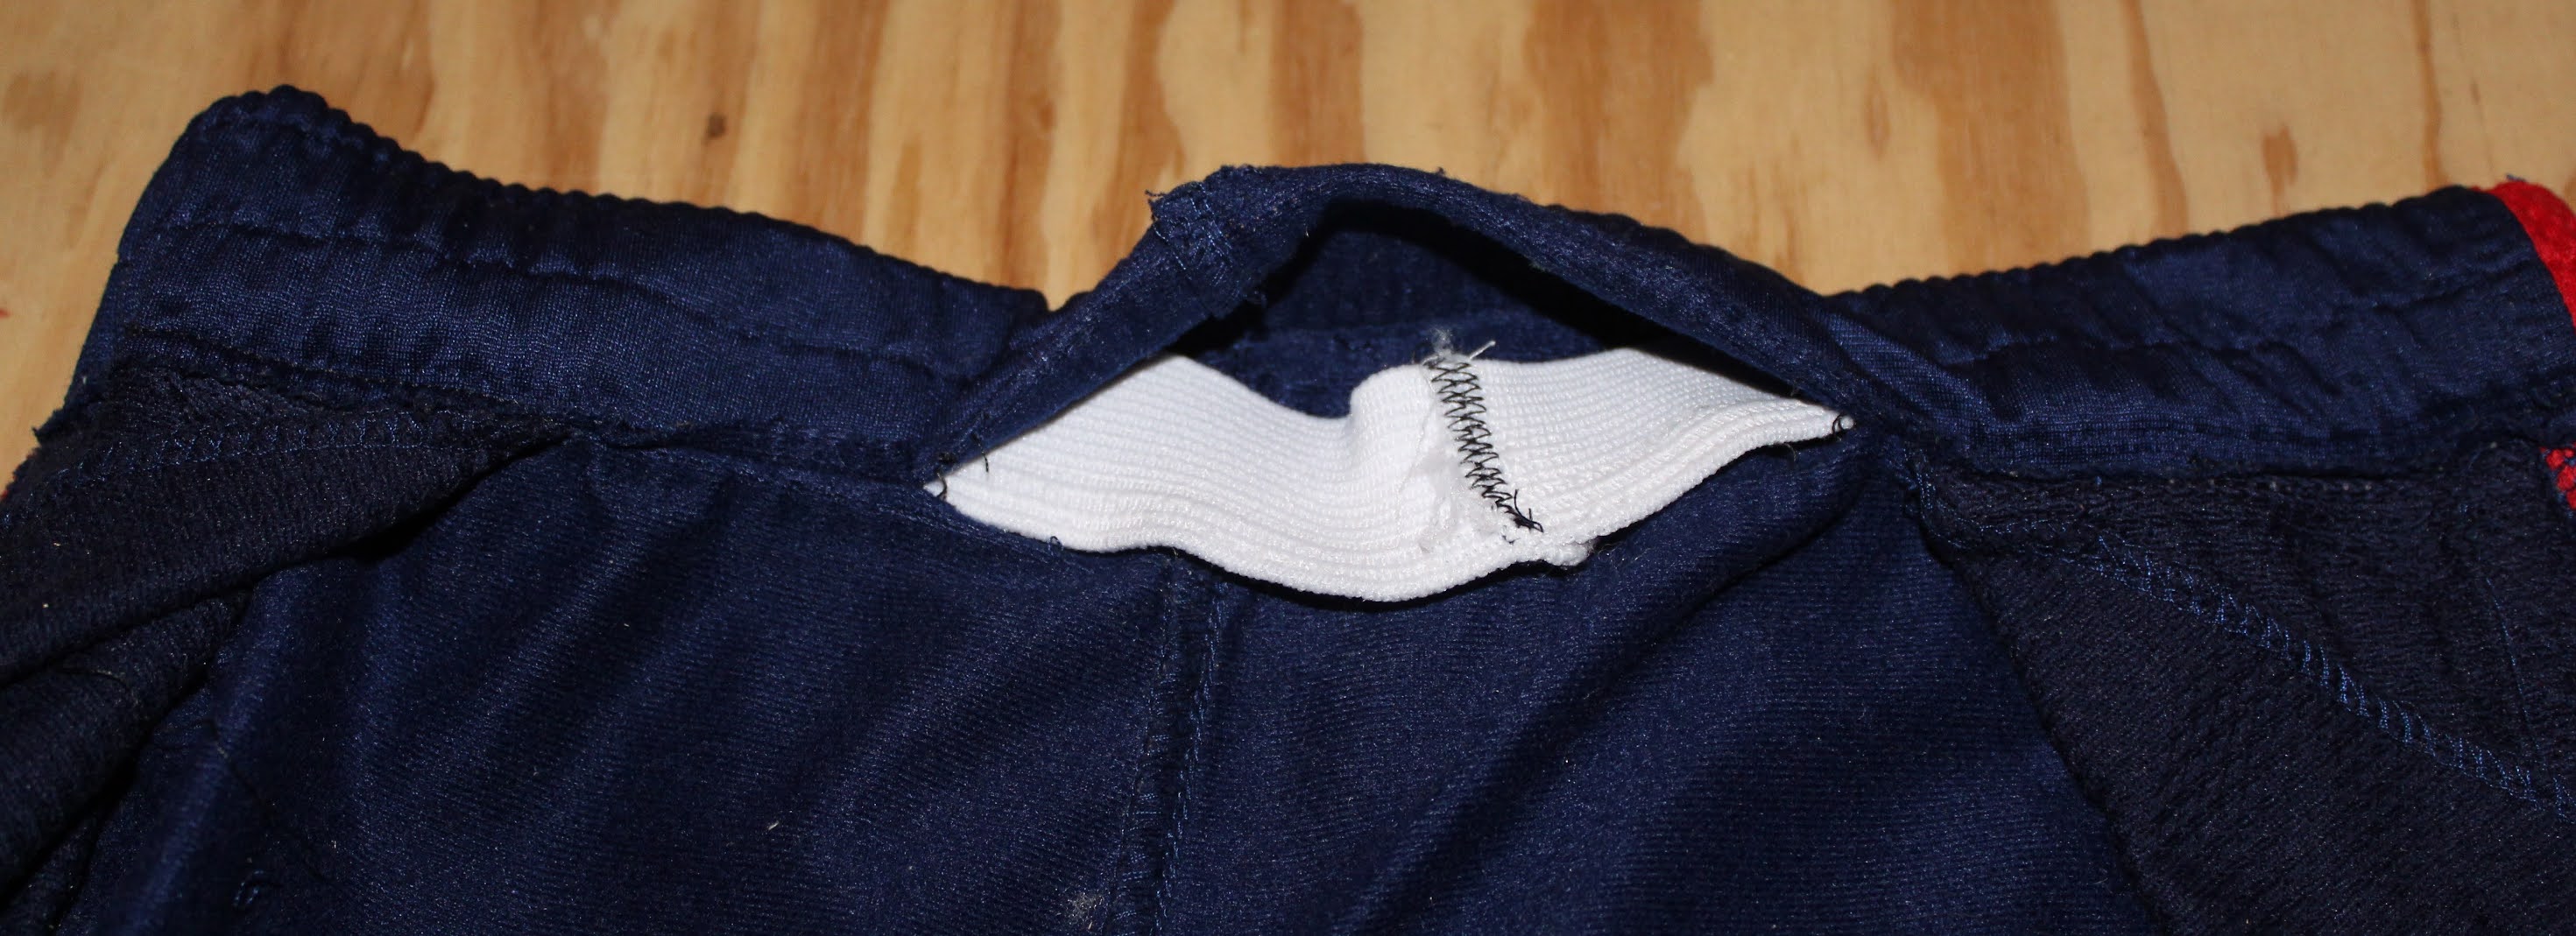 Old Timer's Habits: Replacing the elastic waistband in pants